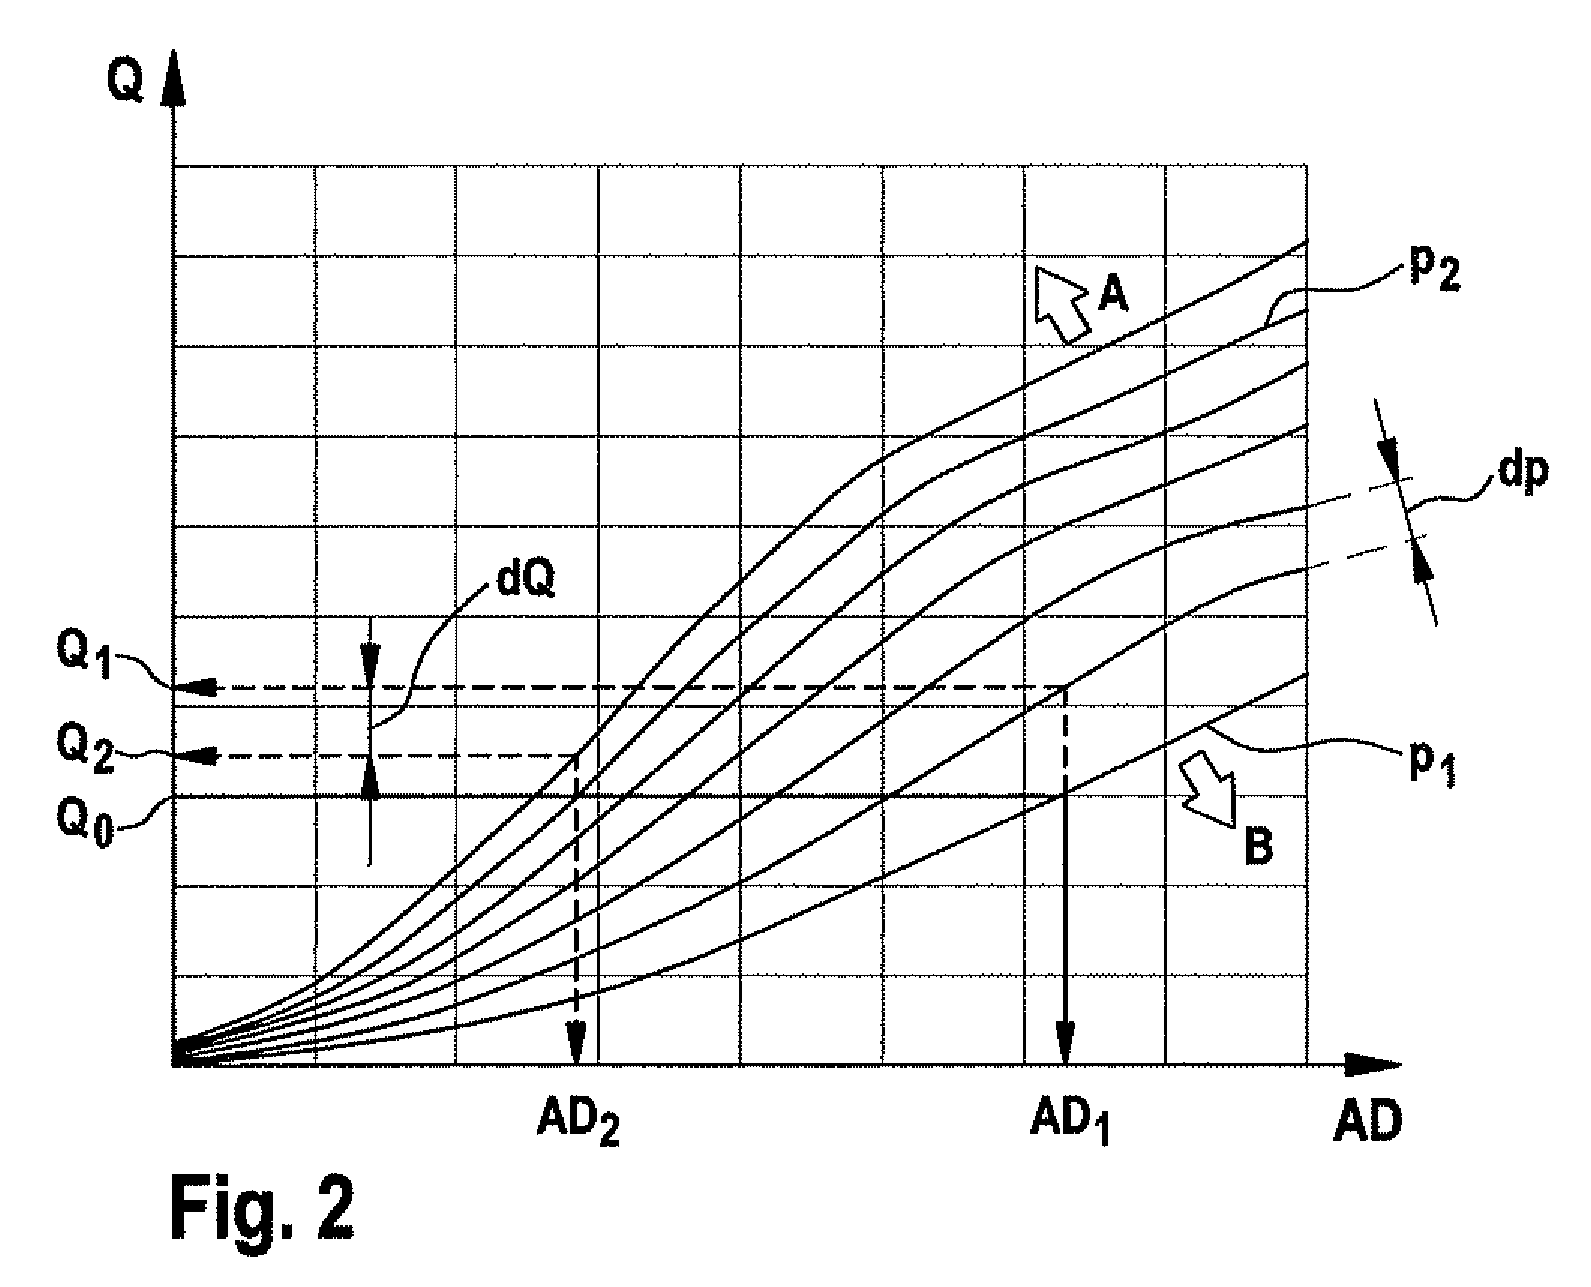 Method for operating a fuel system